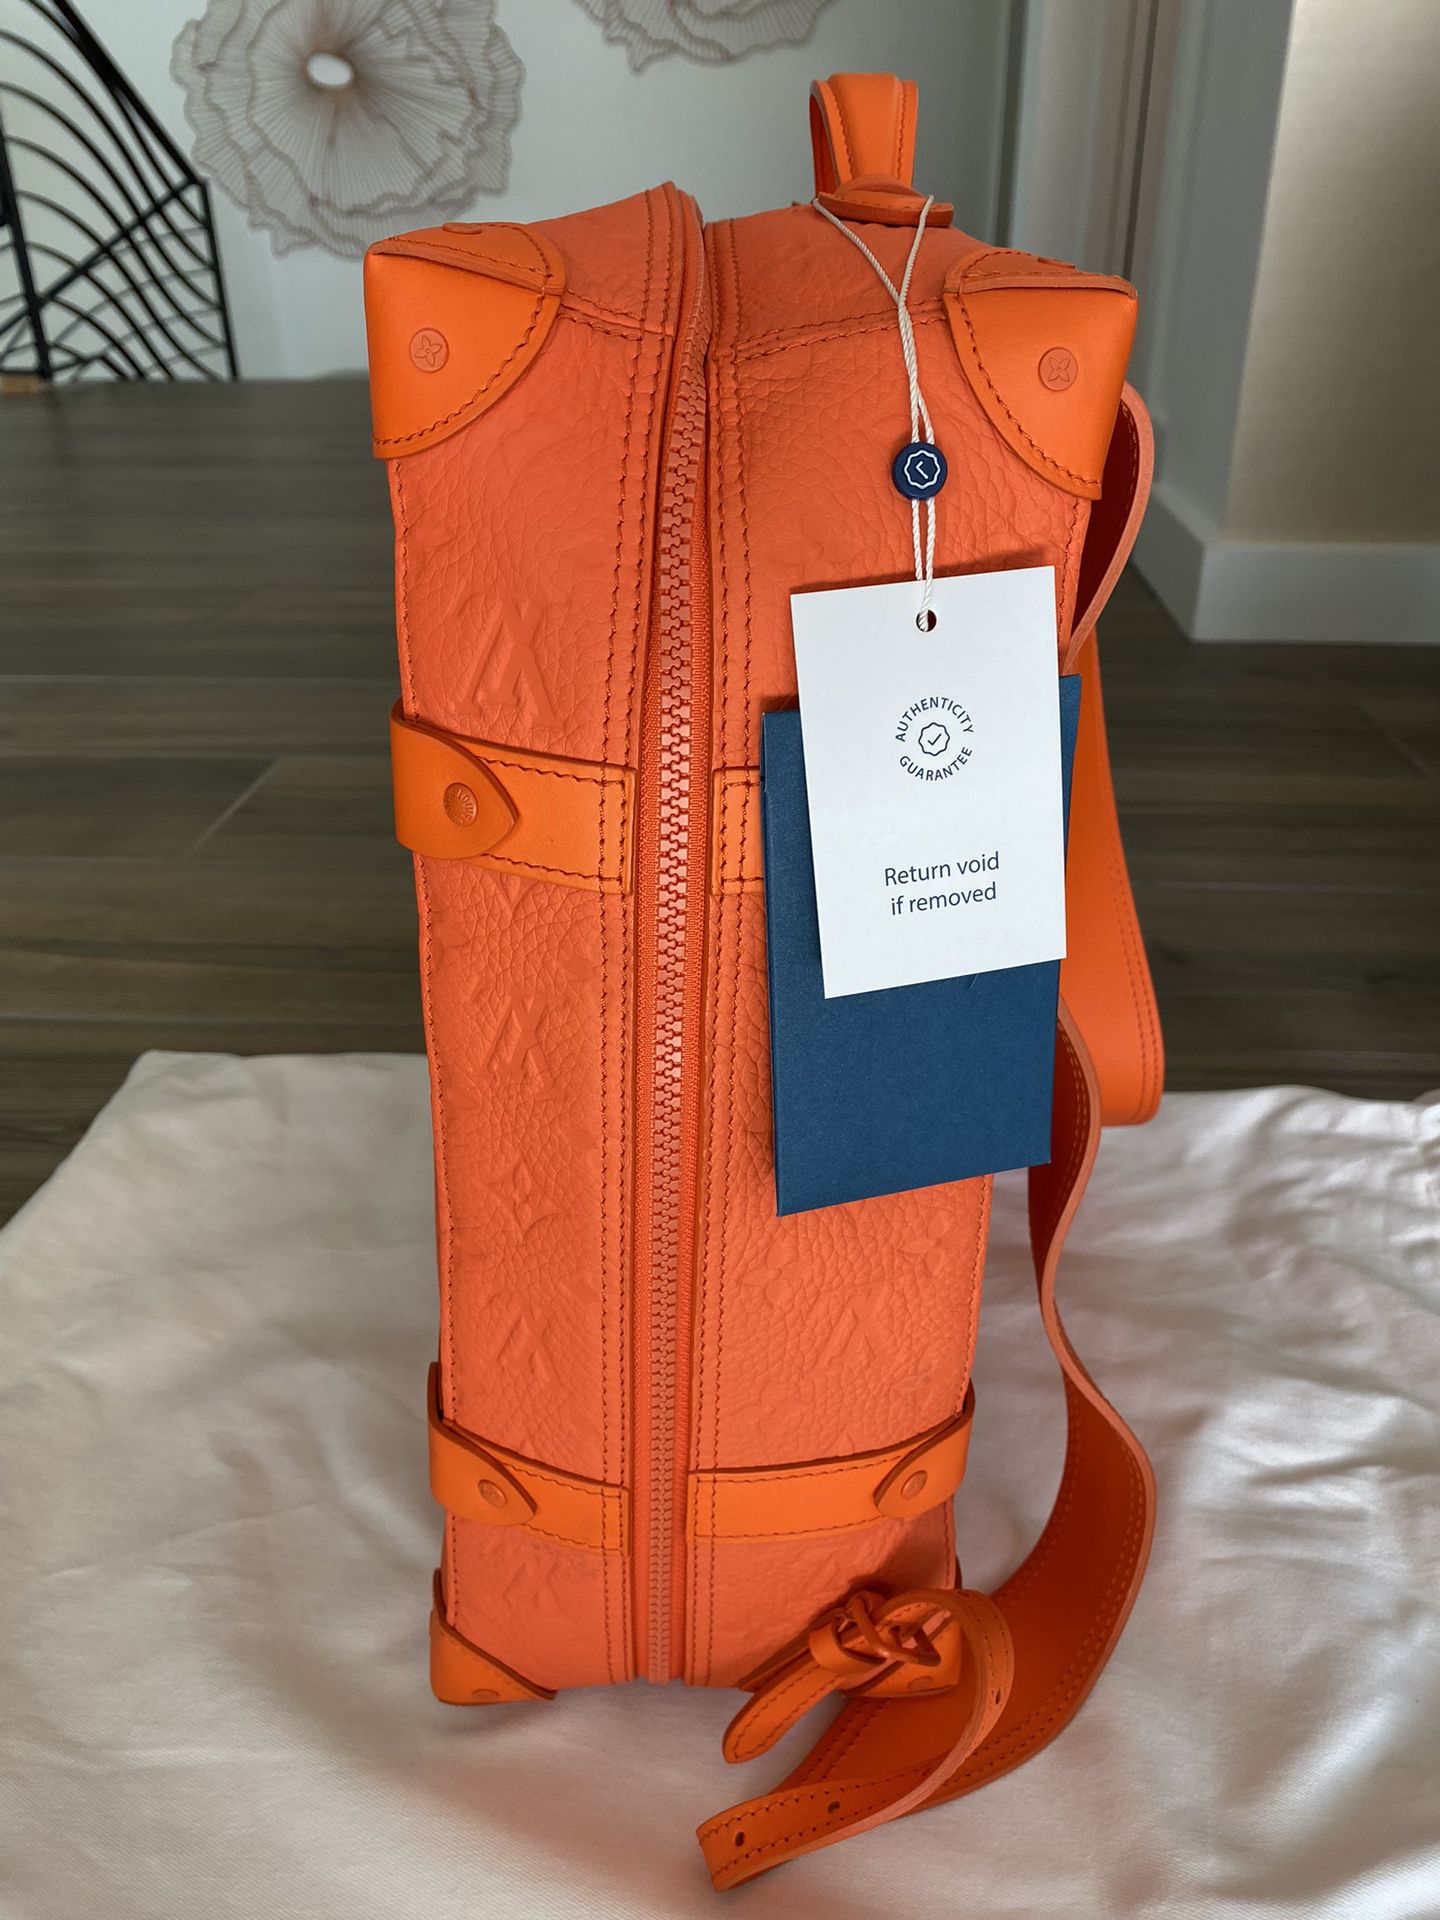 louis vuitton GM Montsouris Backpack for Sale in Ripon, CA - OfferUp